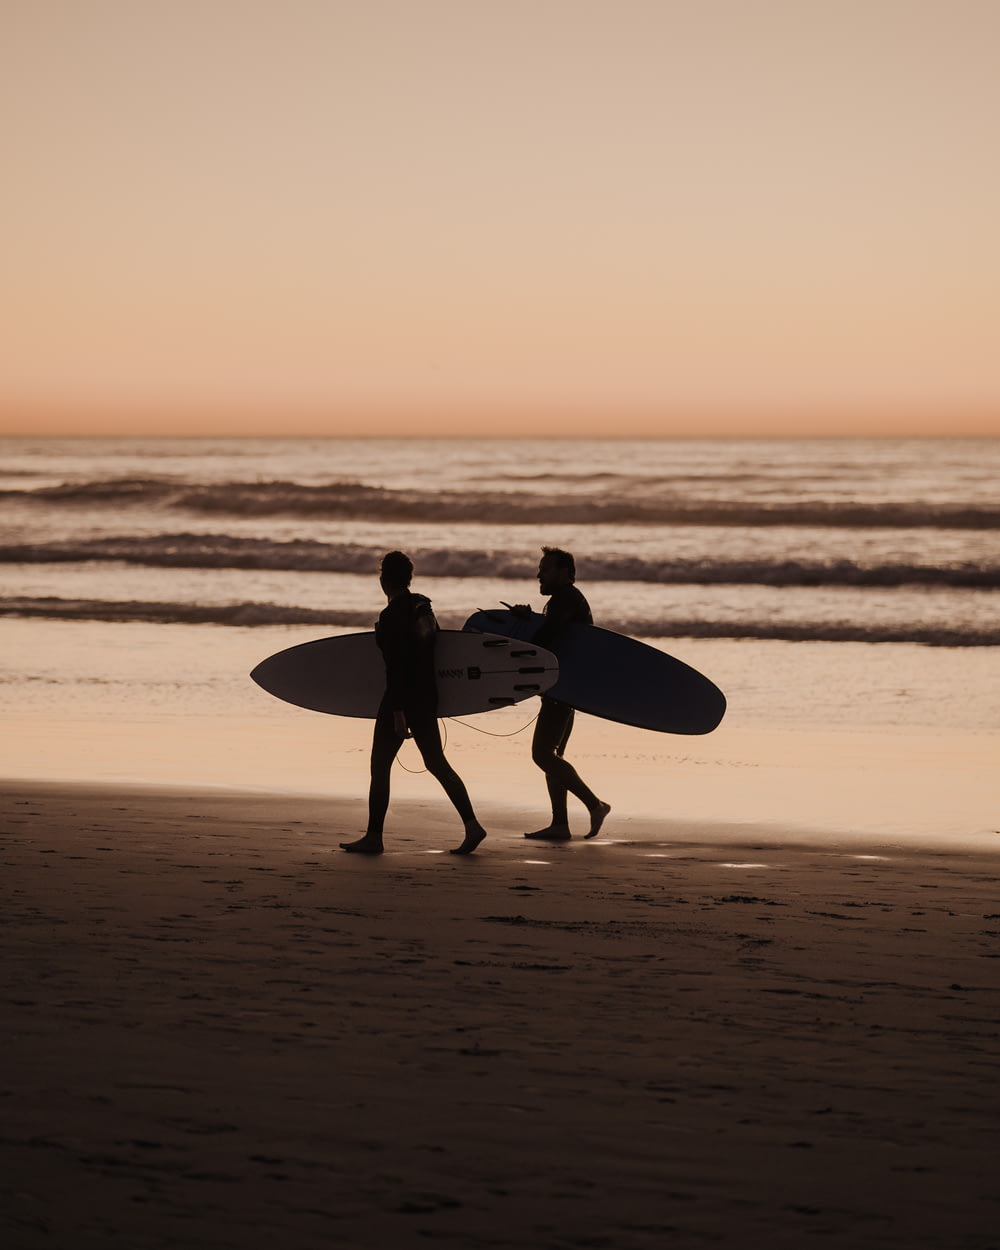 two people walking on a beach with a surfboard